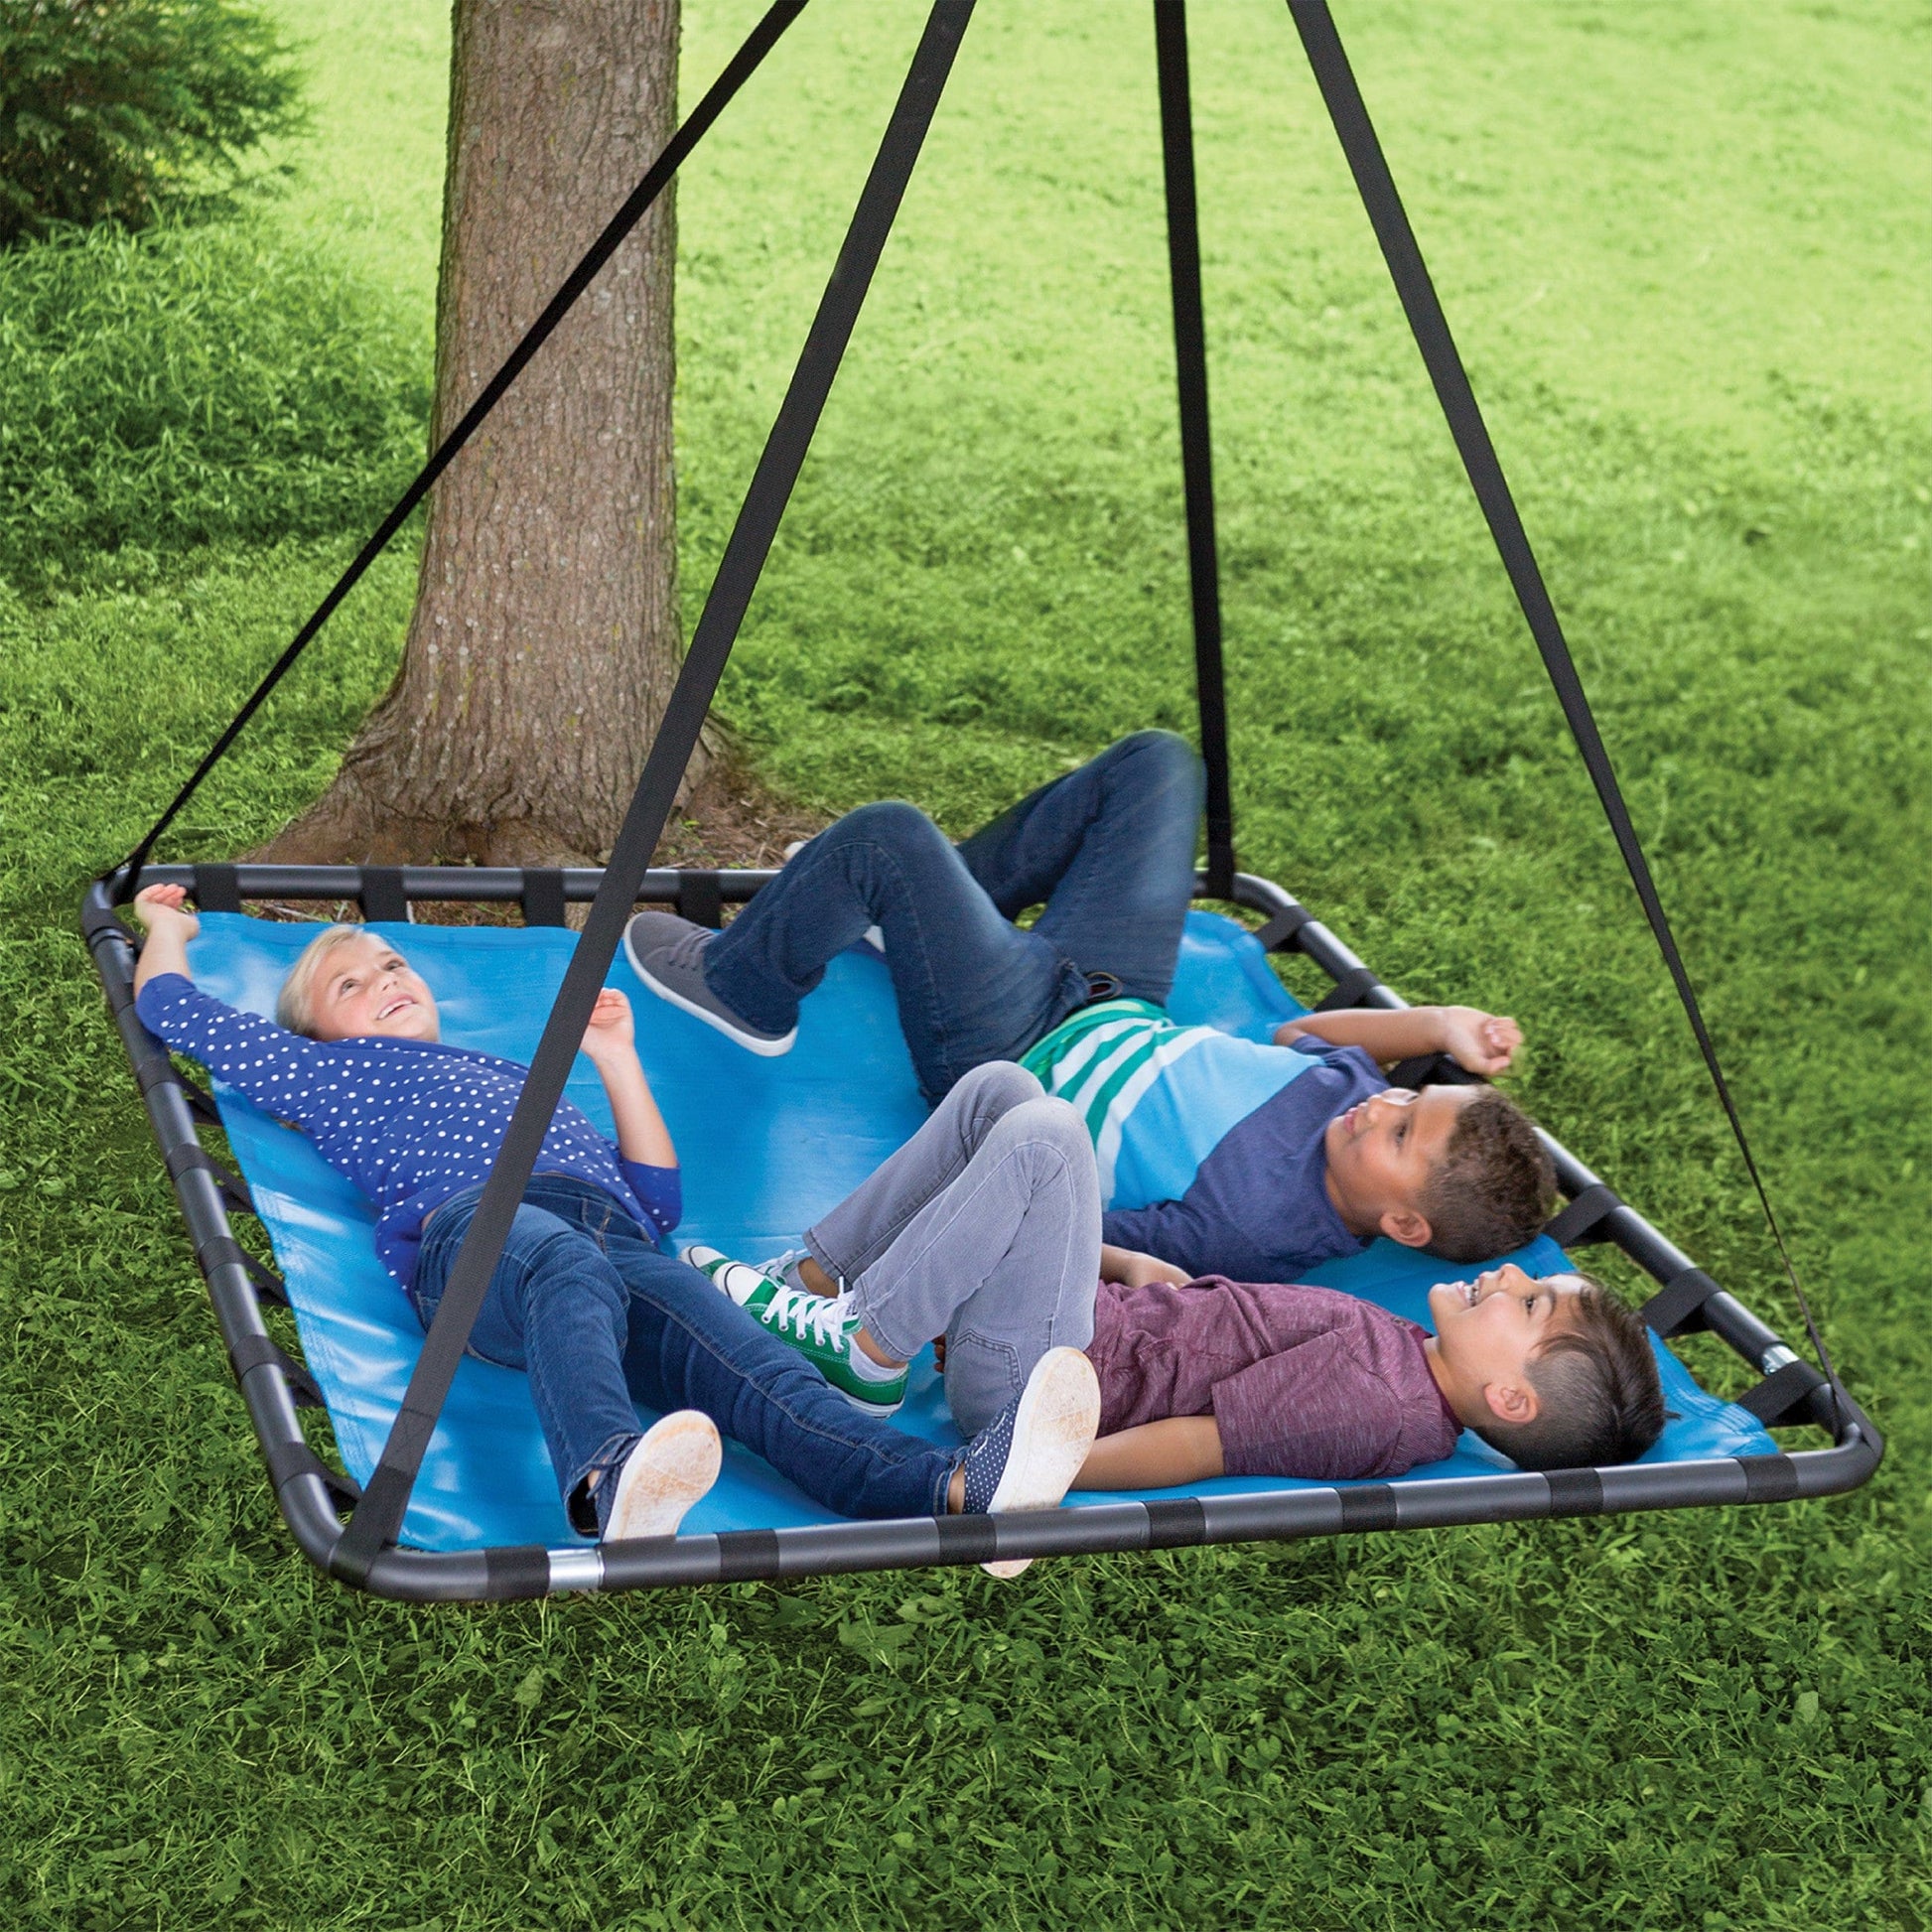 5-Foot Sky Pod Platform Swing and Sky Dome Arched Stand Set